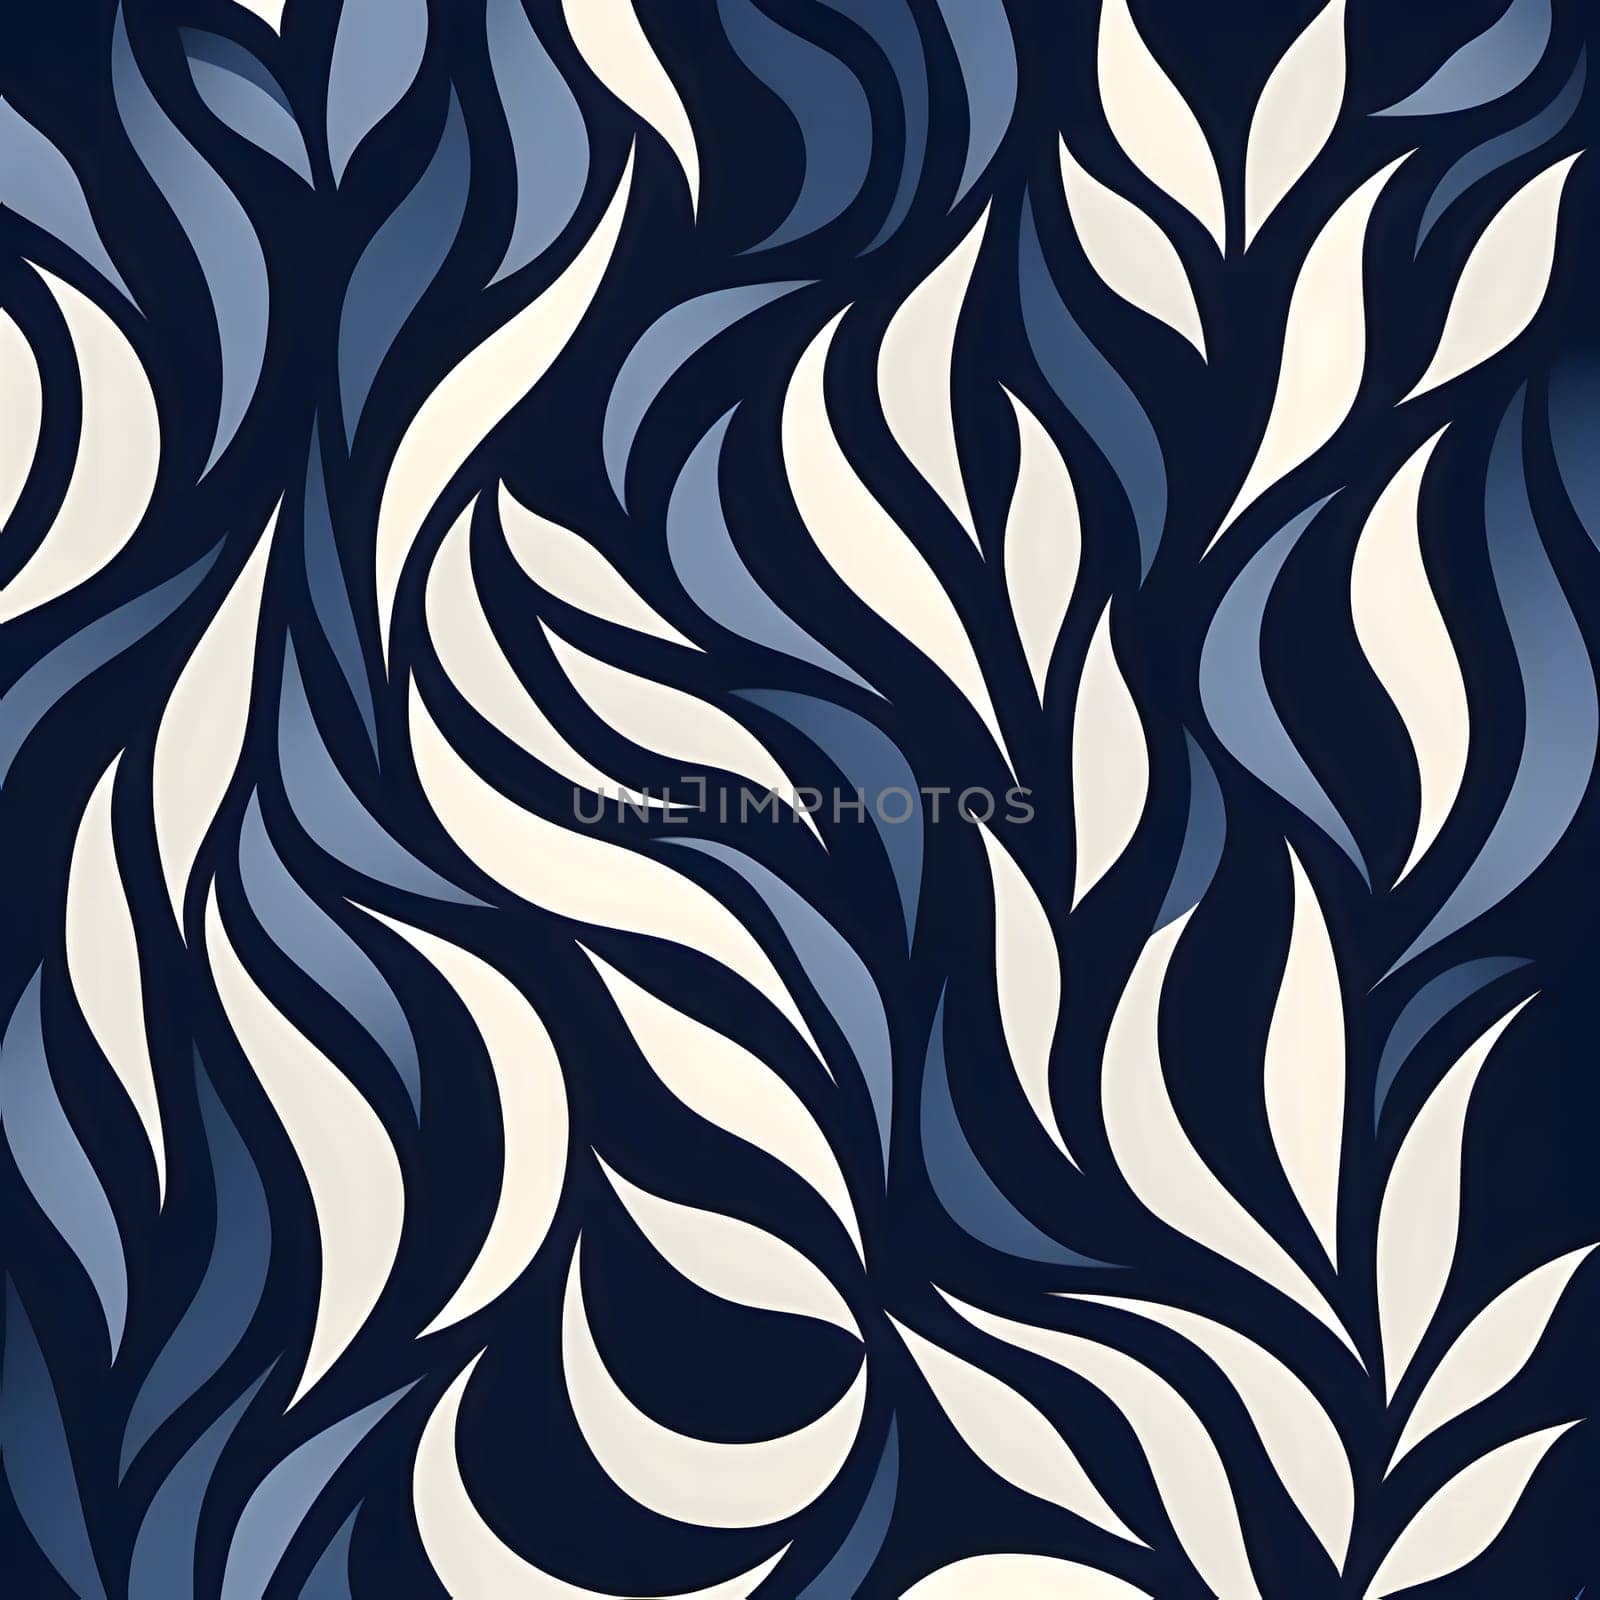 Patterns and banners backgrounds: Seamless abstract hand-drawn waves pattern, wavy background.